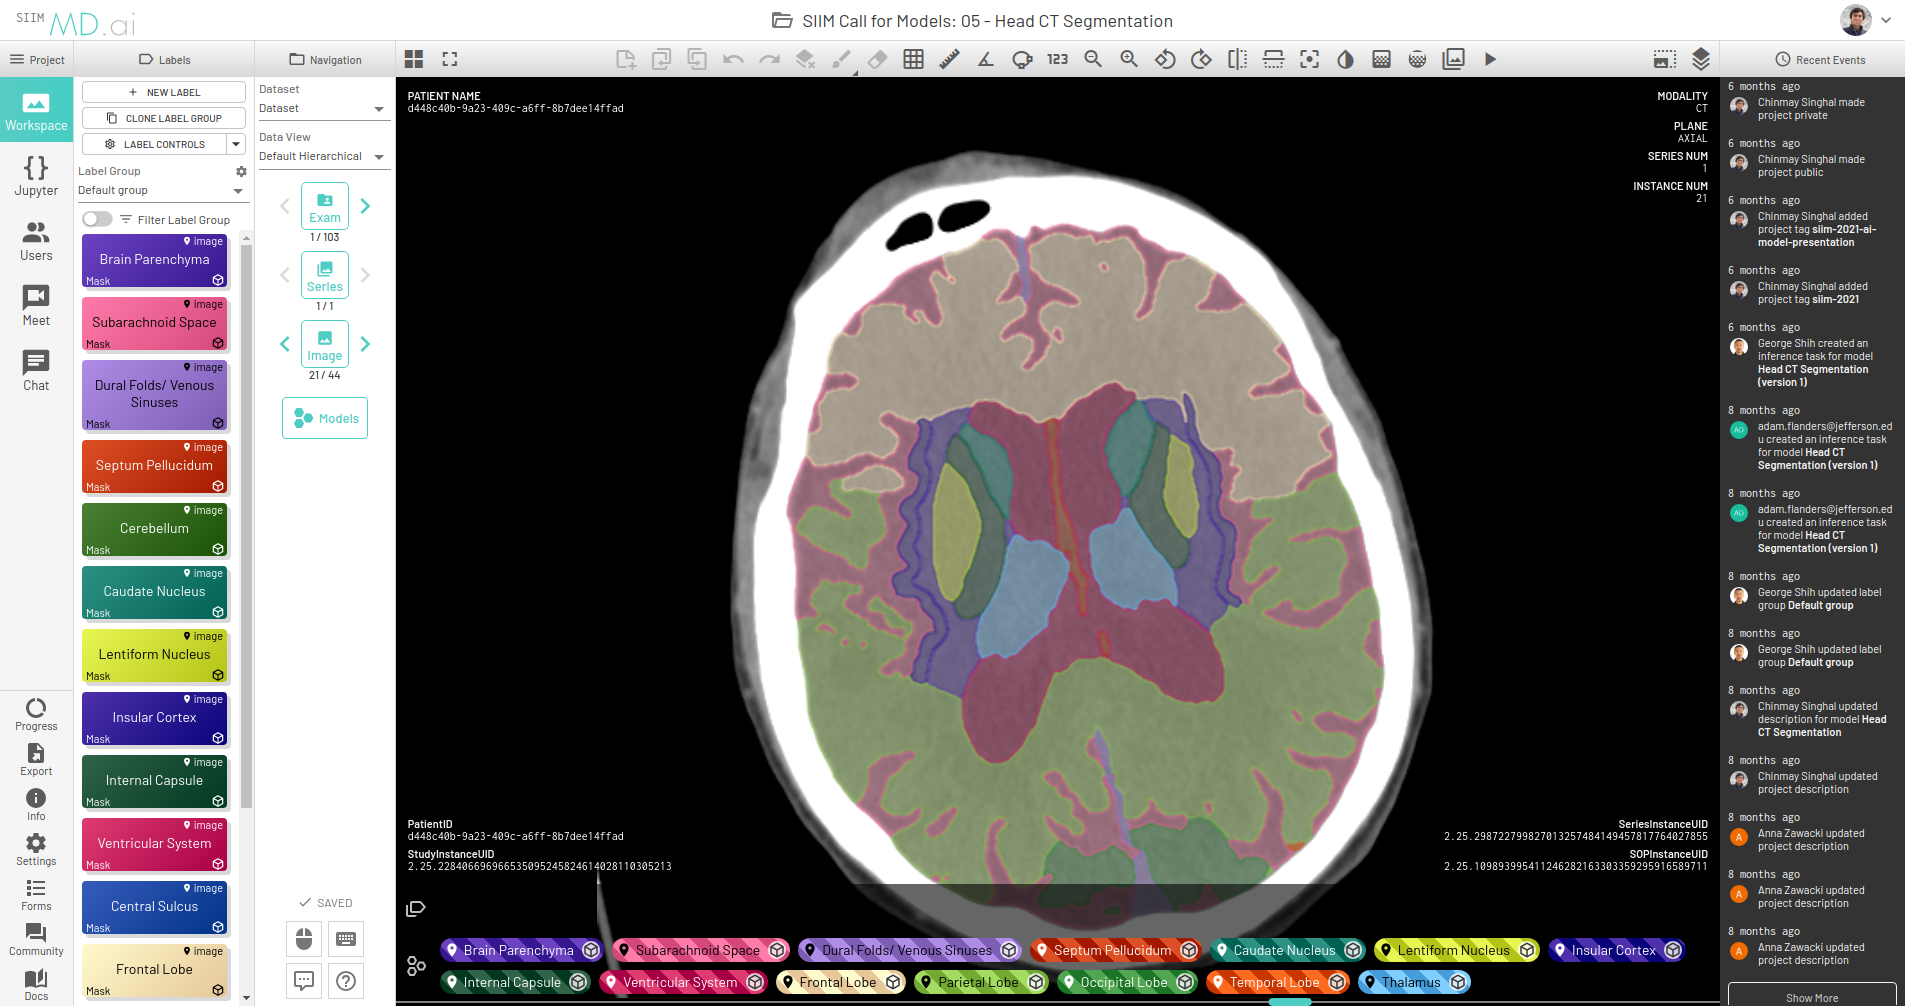 User interface of MD.ai displaying outputs from a brain segmentation model deployed on the platform.